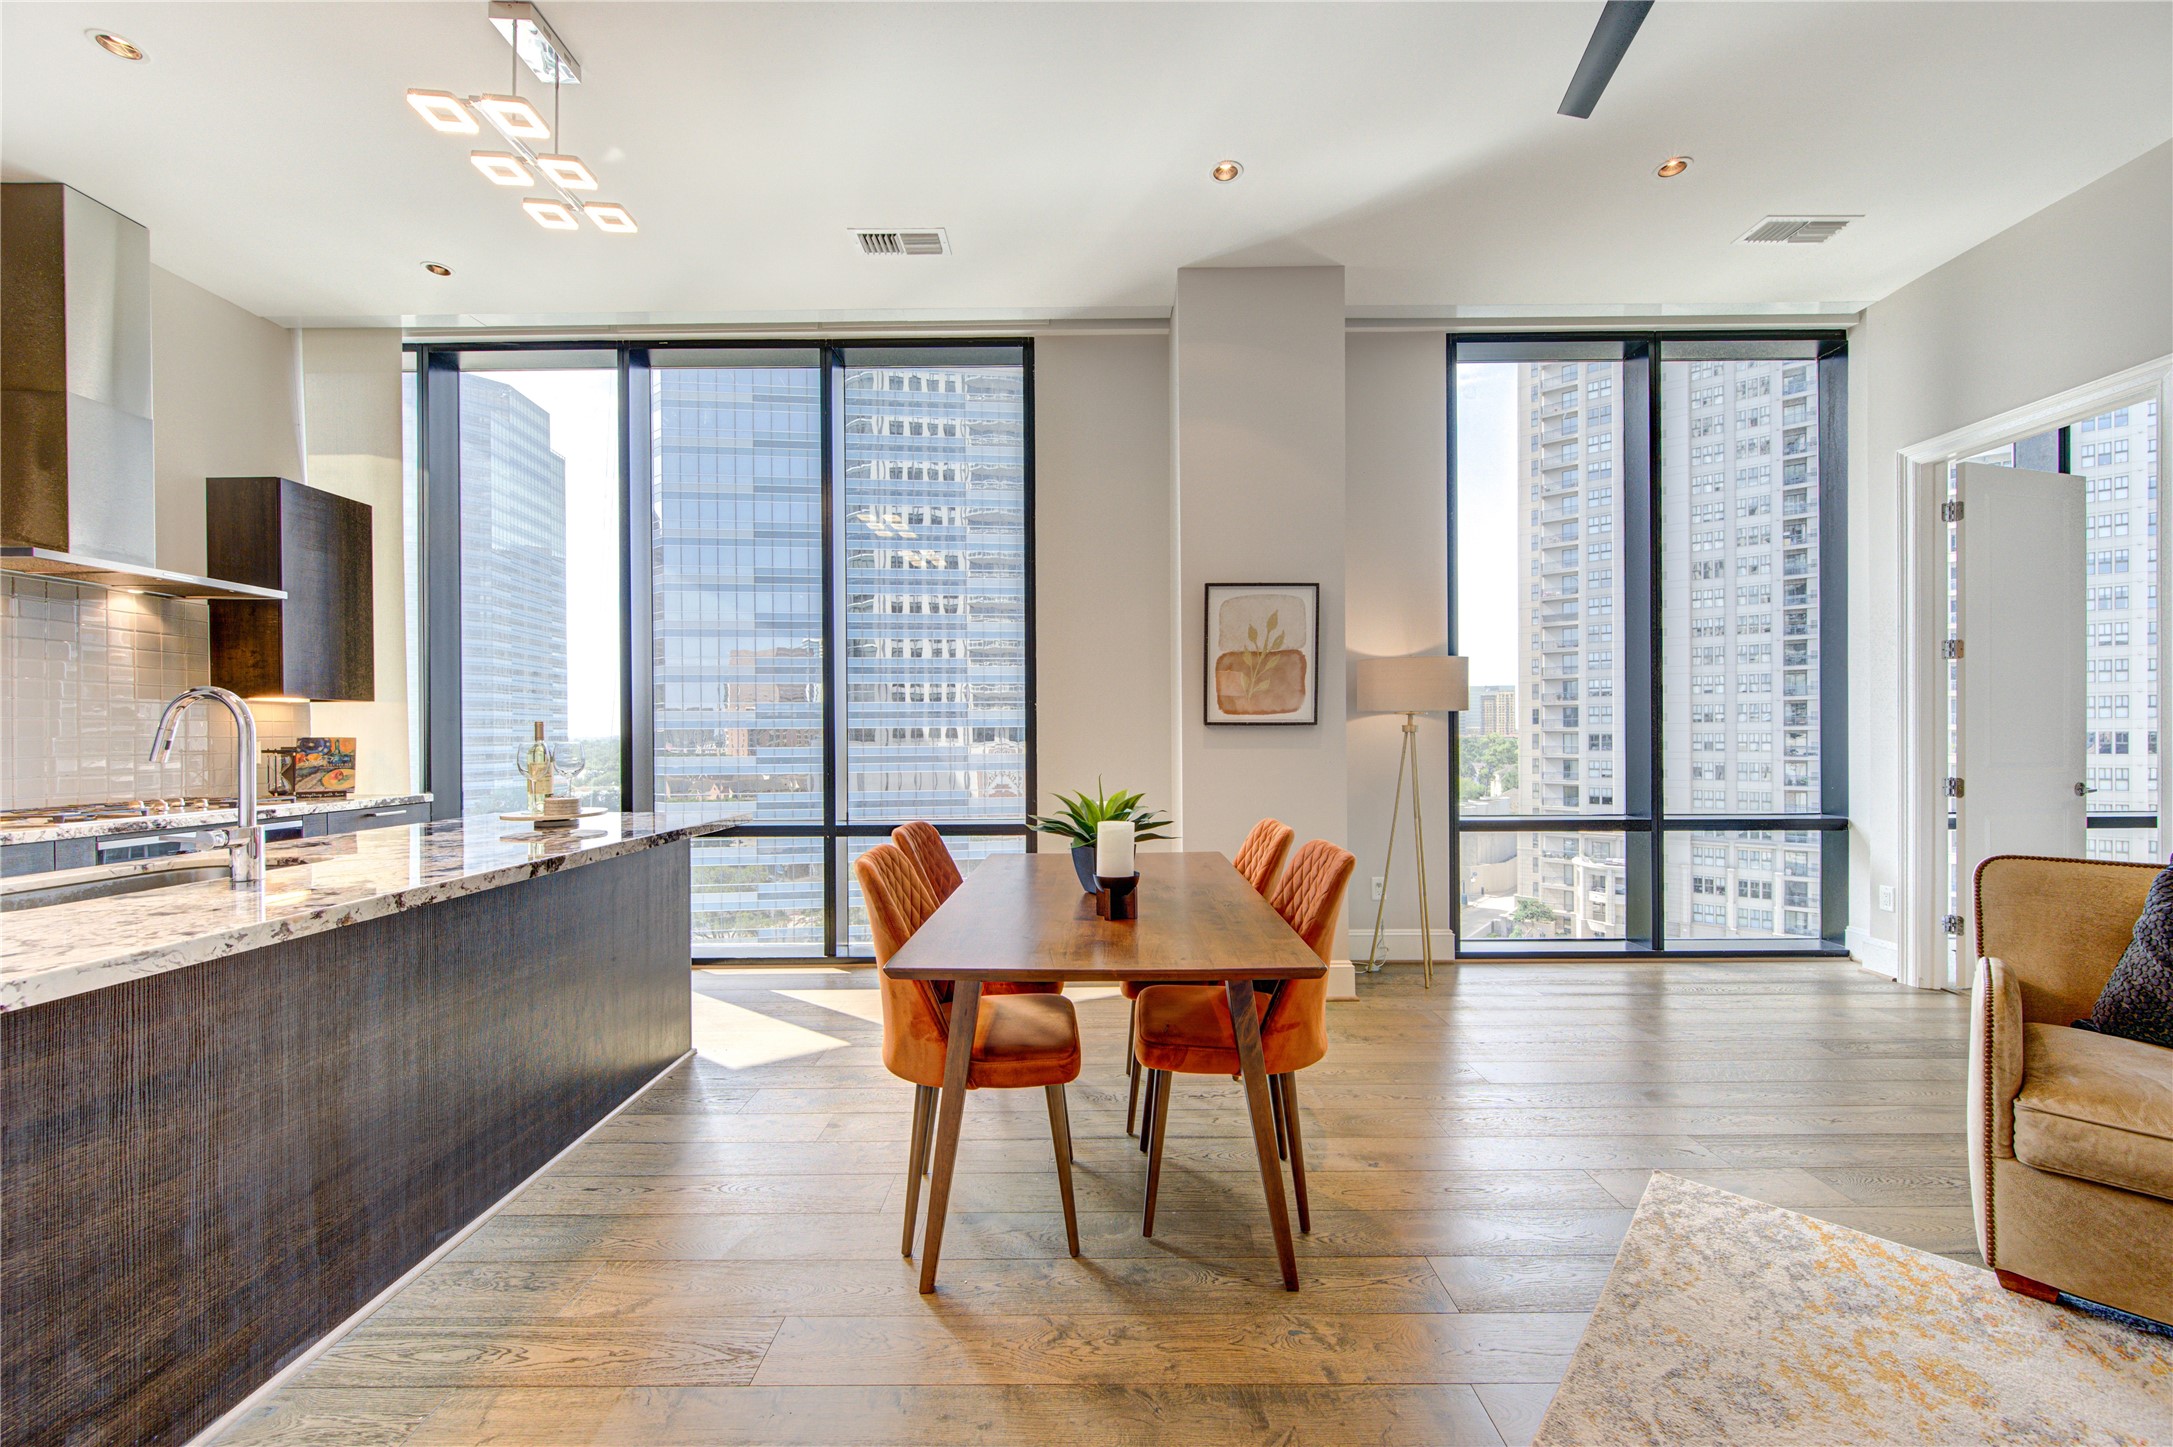 The open floorplan is designed for today's modern lifestyle and this unit offers spectacular views of the city.